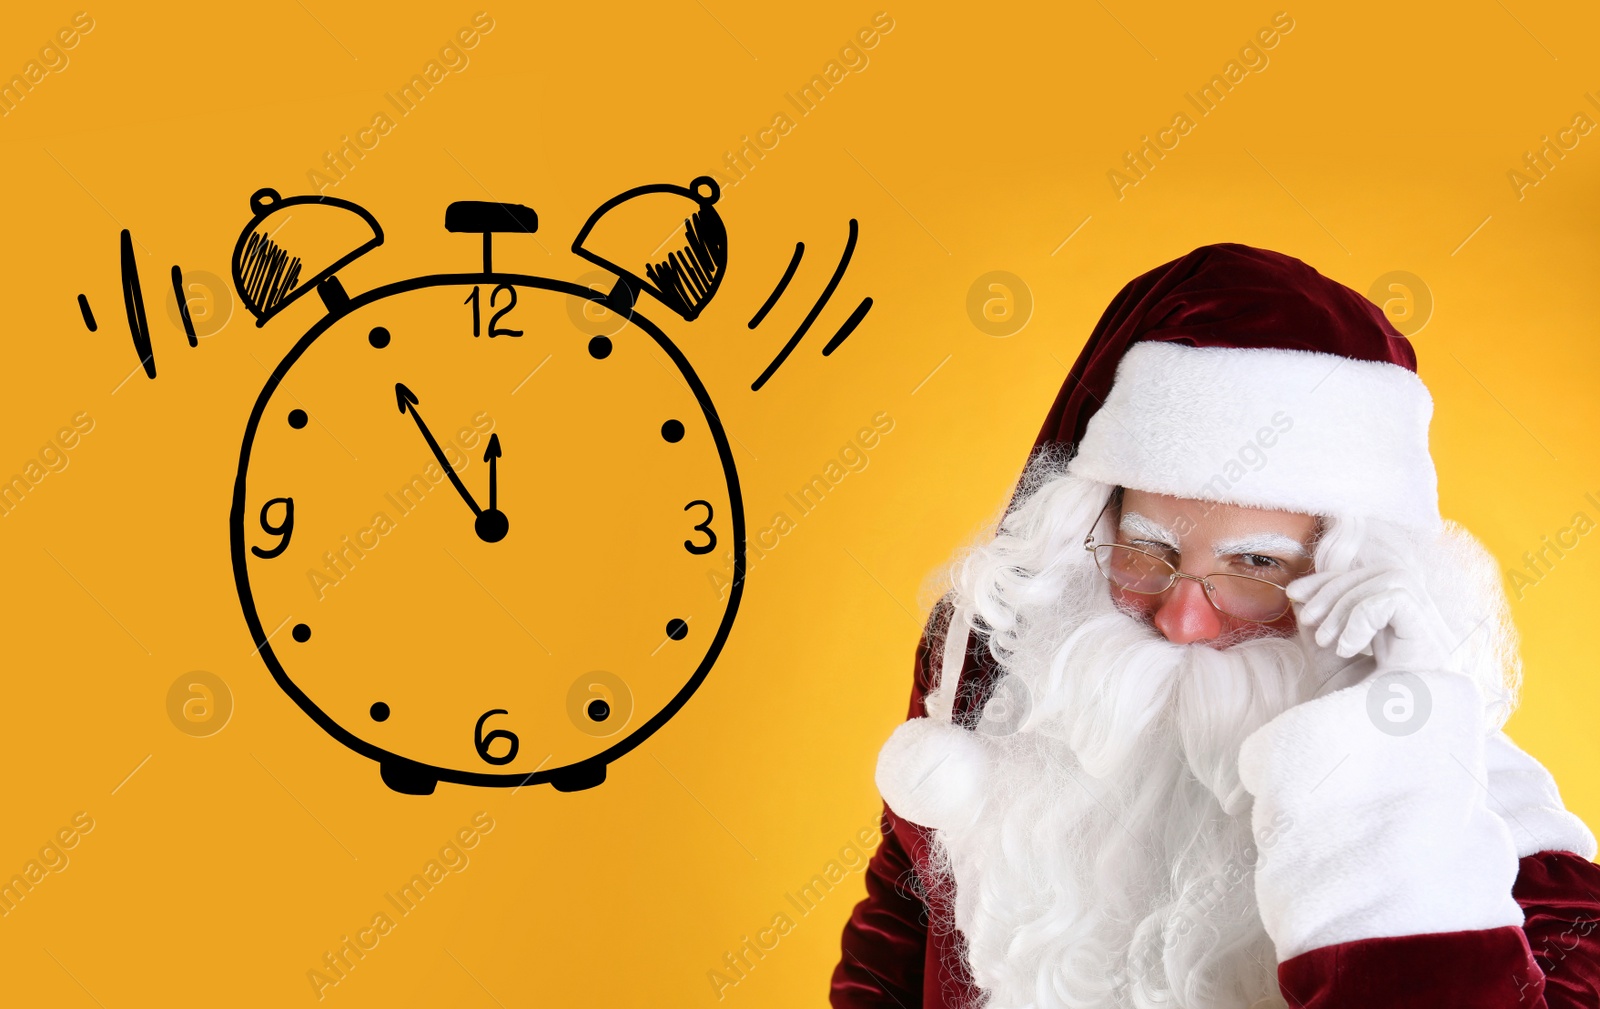 Image of Christmas countdown. Clock showing five minutes to midnight near Santa Claus on yellow background